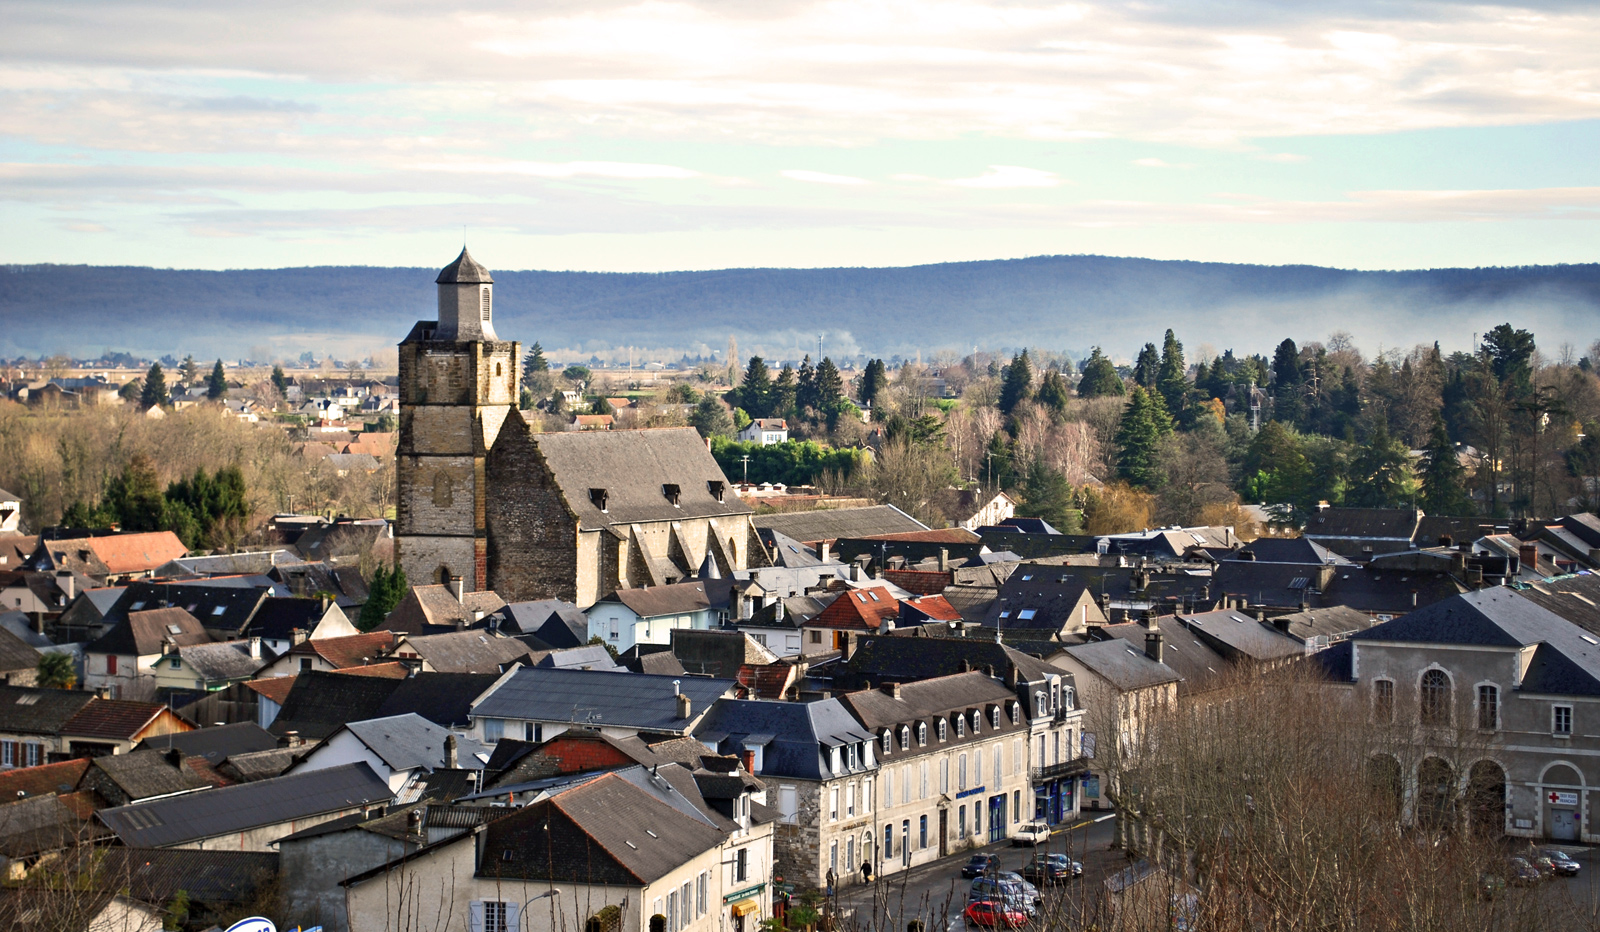 5 good reasons to visit Nay, in Pays de Nay